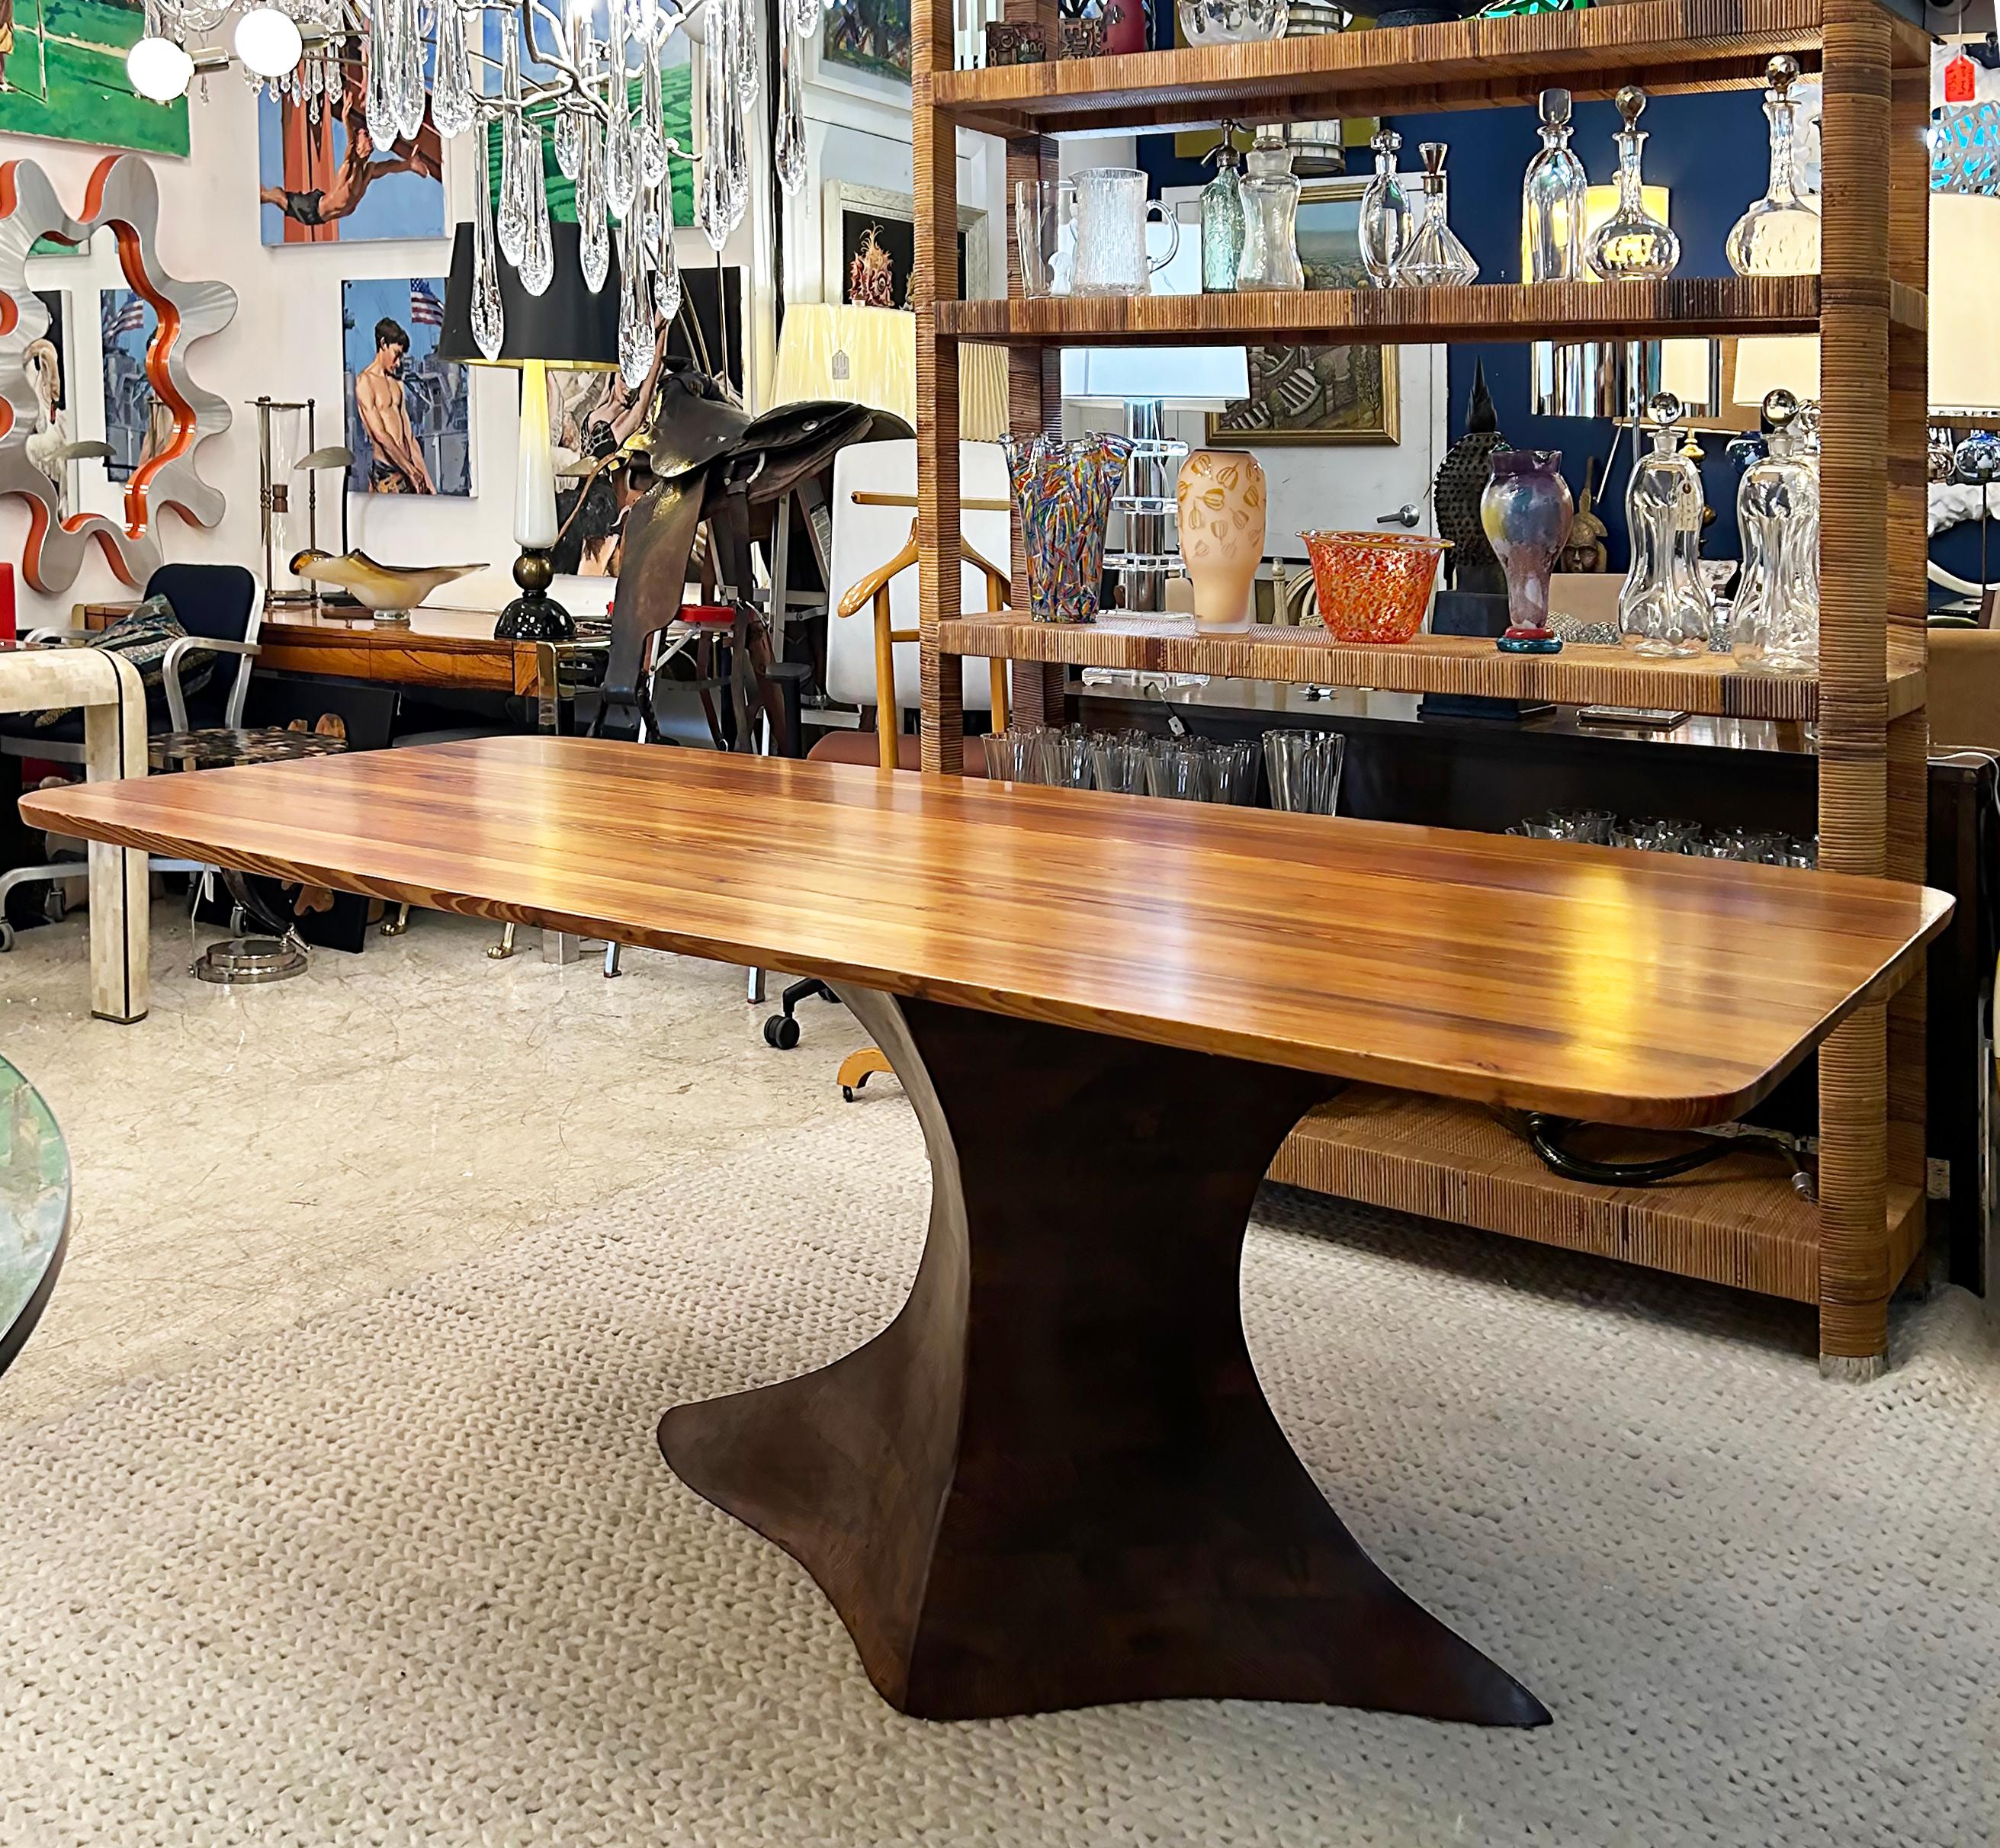 Dade County Pine Sculptural Studio Dining Table, Ray Pirello Woodworking 

Offered for sale is a custom-made studio-crafted reclaimed Miami-Dade County sculptural pine dining table by Ray Pirello in his Miami woodworking studios in Biscayne Park. 